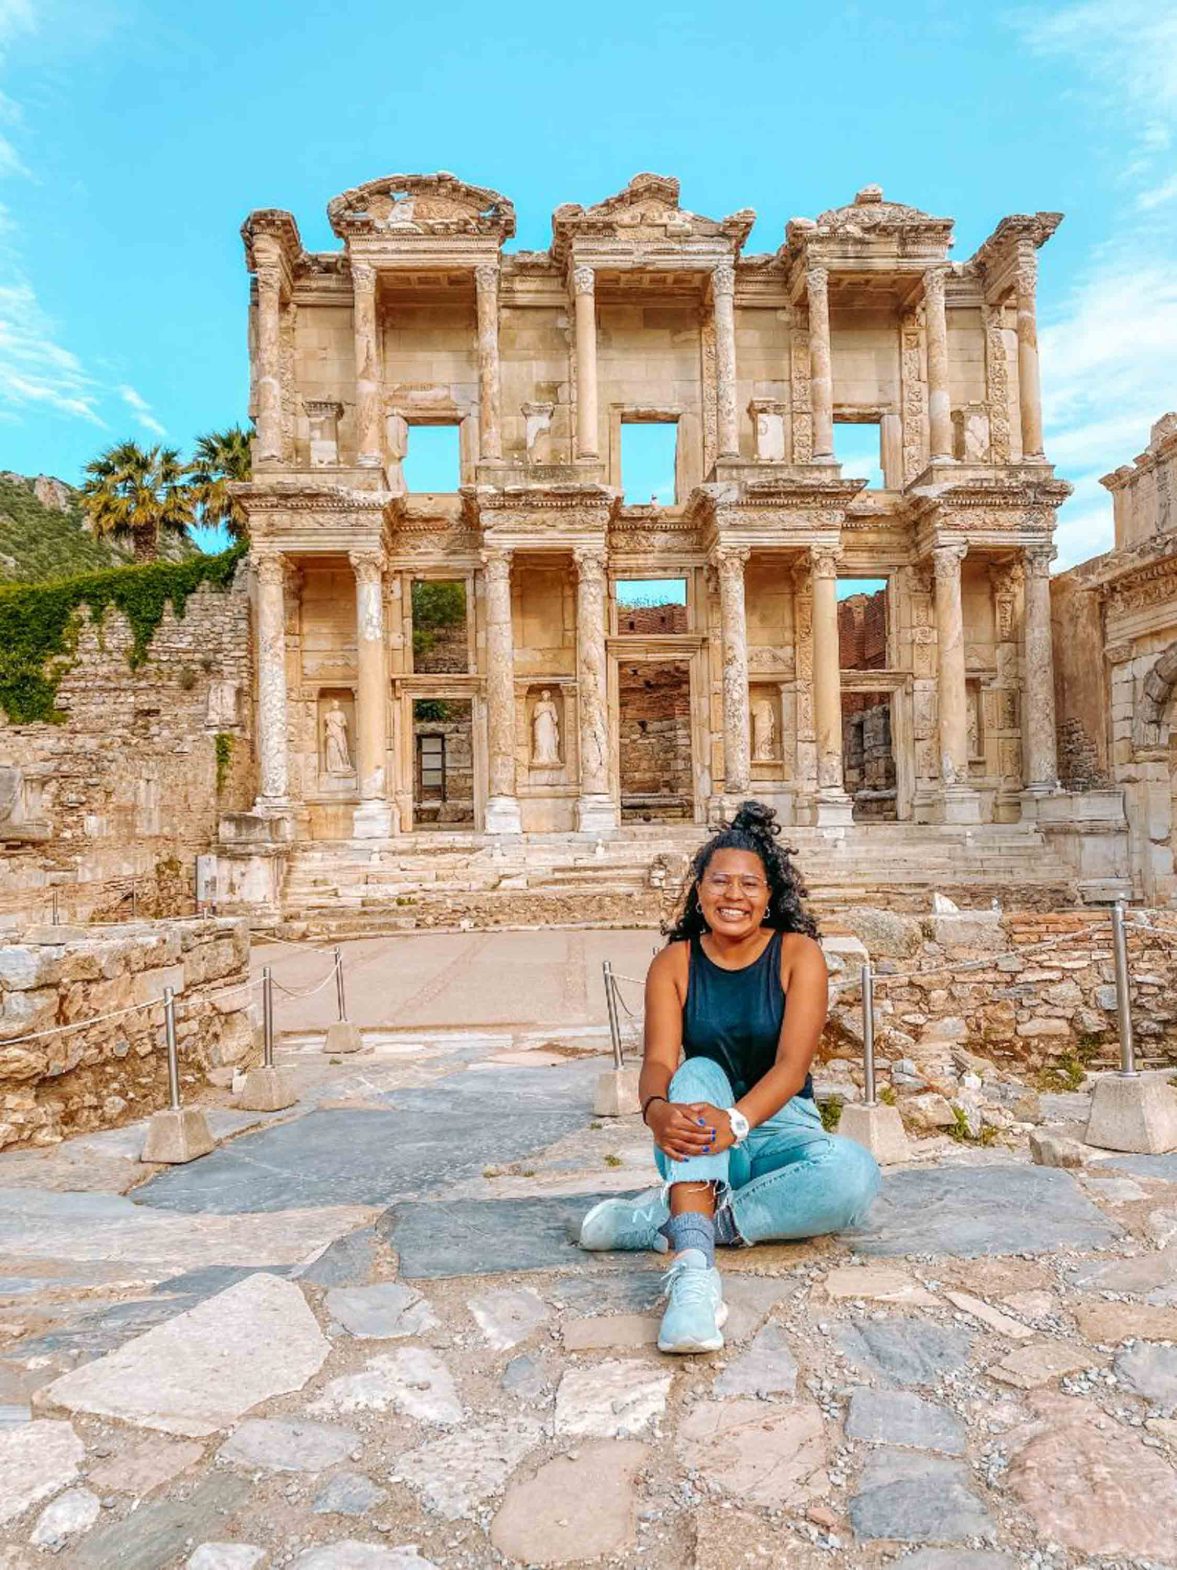 A black woman sits on the ground in front of some ruins.